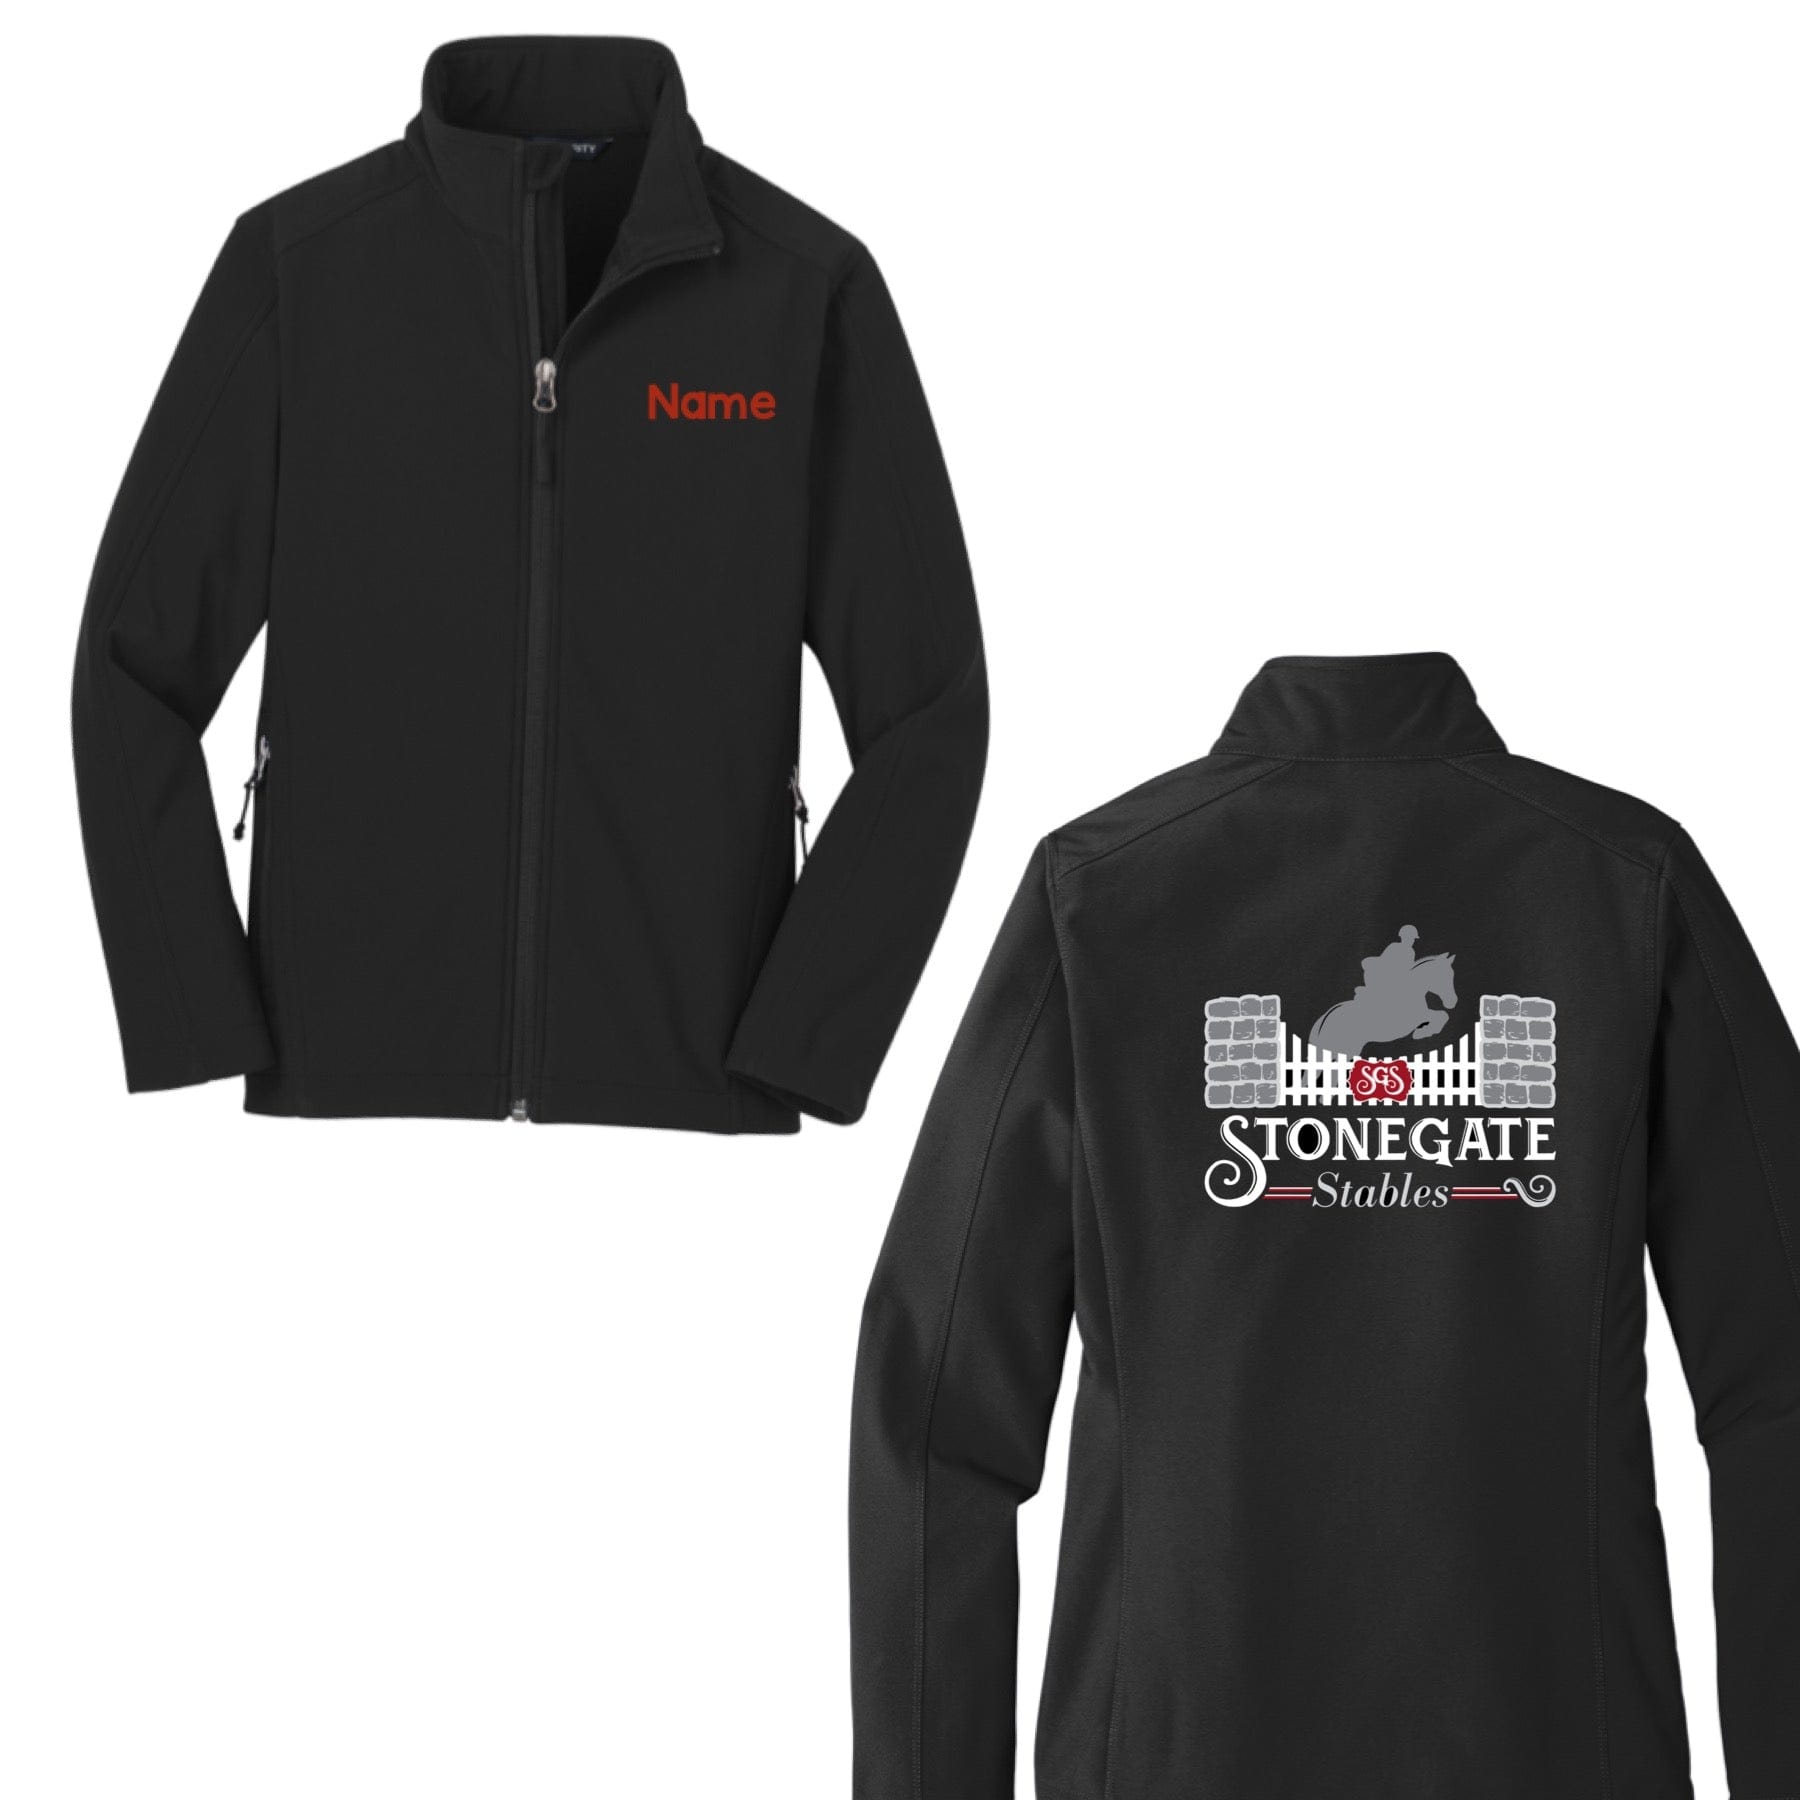 Equestrian Team Apparel Stonegate Stables Shell Jacket and Vest equestrian team apparel online tack store mobile tack store custom farm apparel custom show stable clothing equestrian lifestyle horse show clothing riding clothes horses equestrian tack store